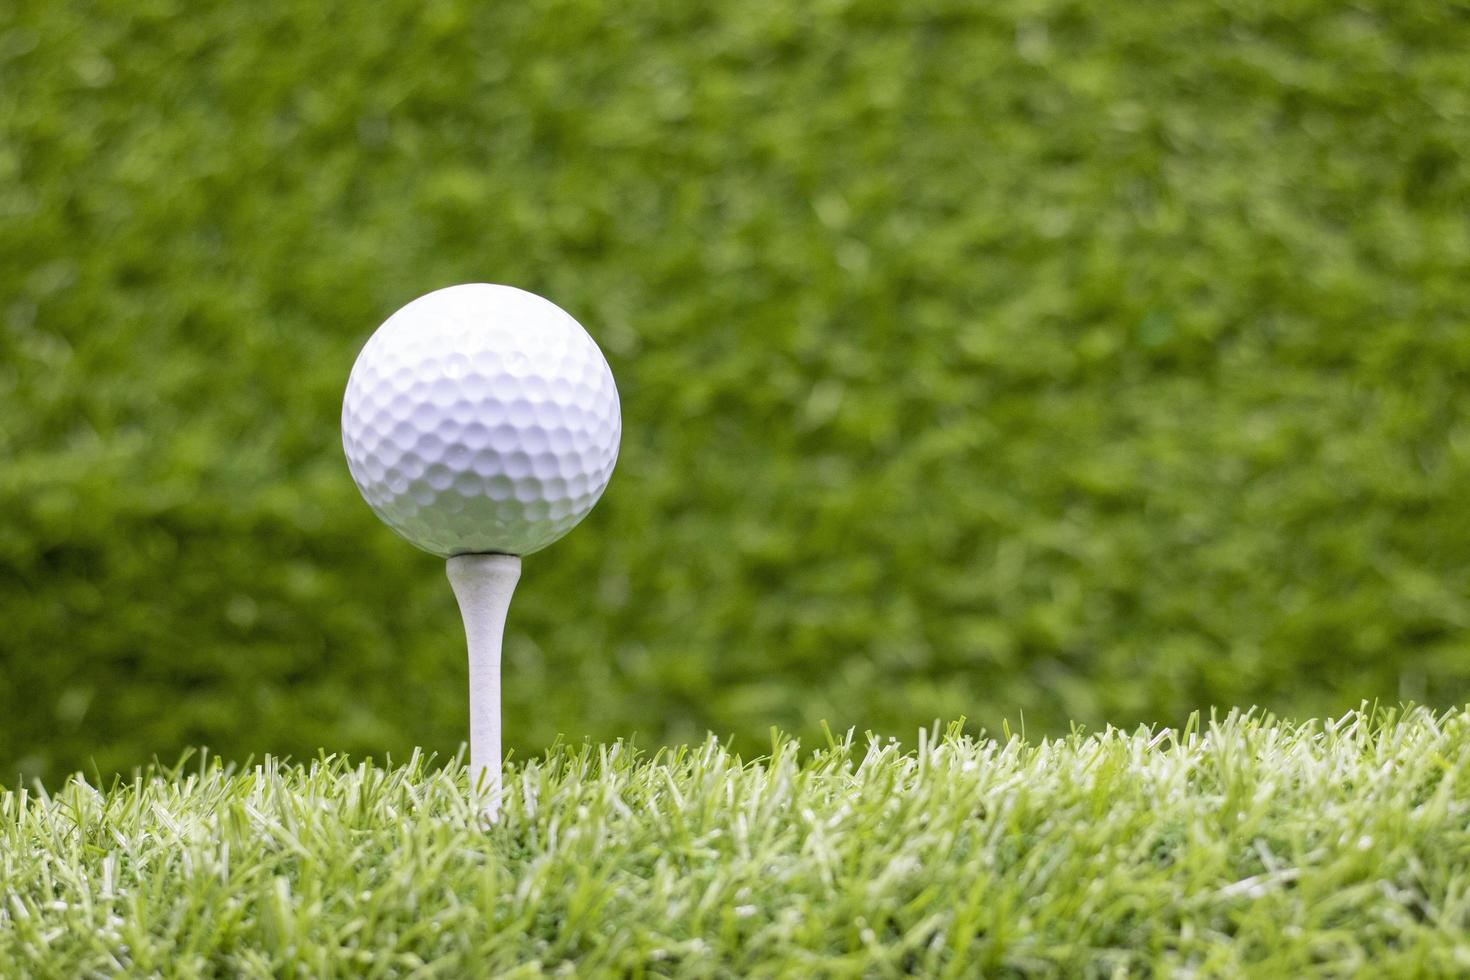 Golf ball with tee are on green grass photo